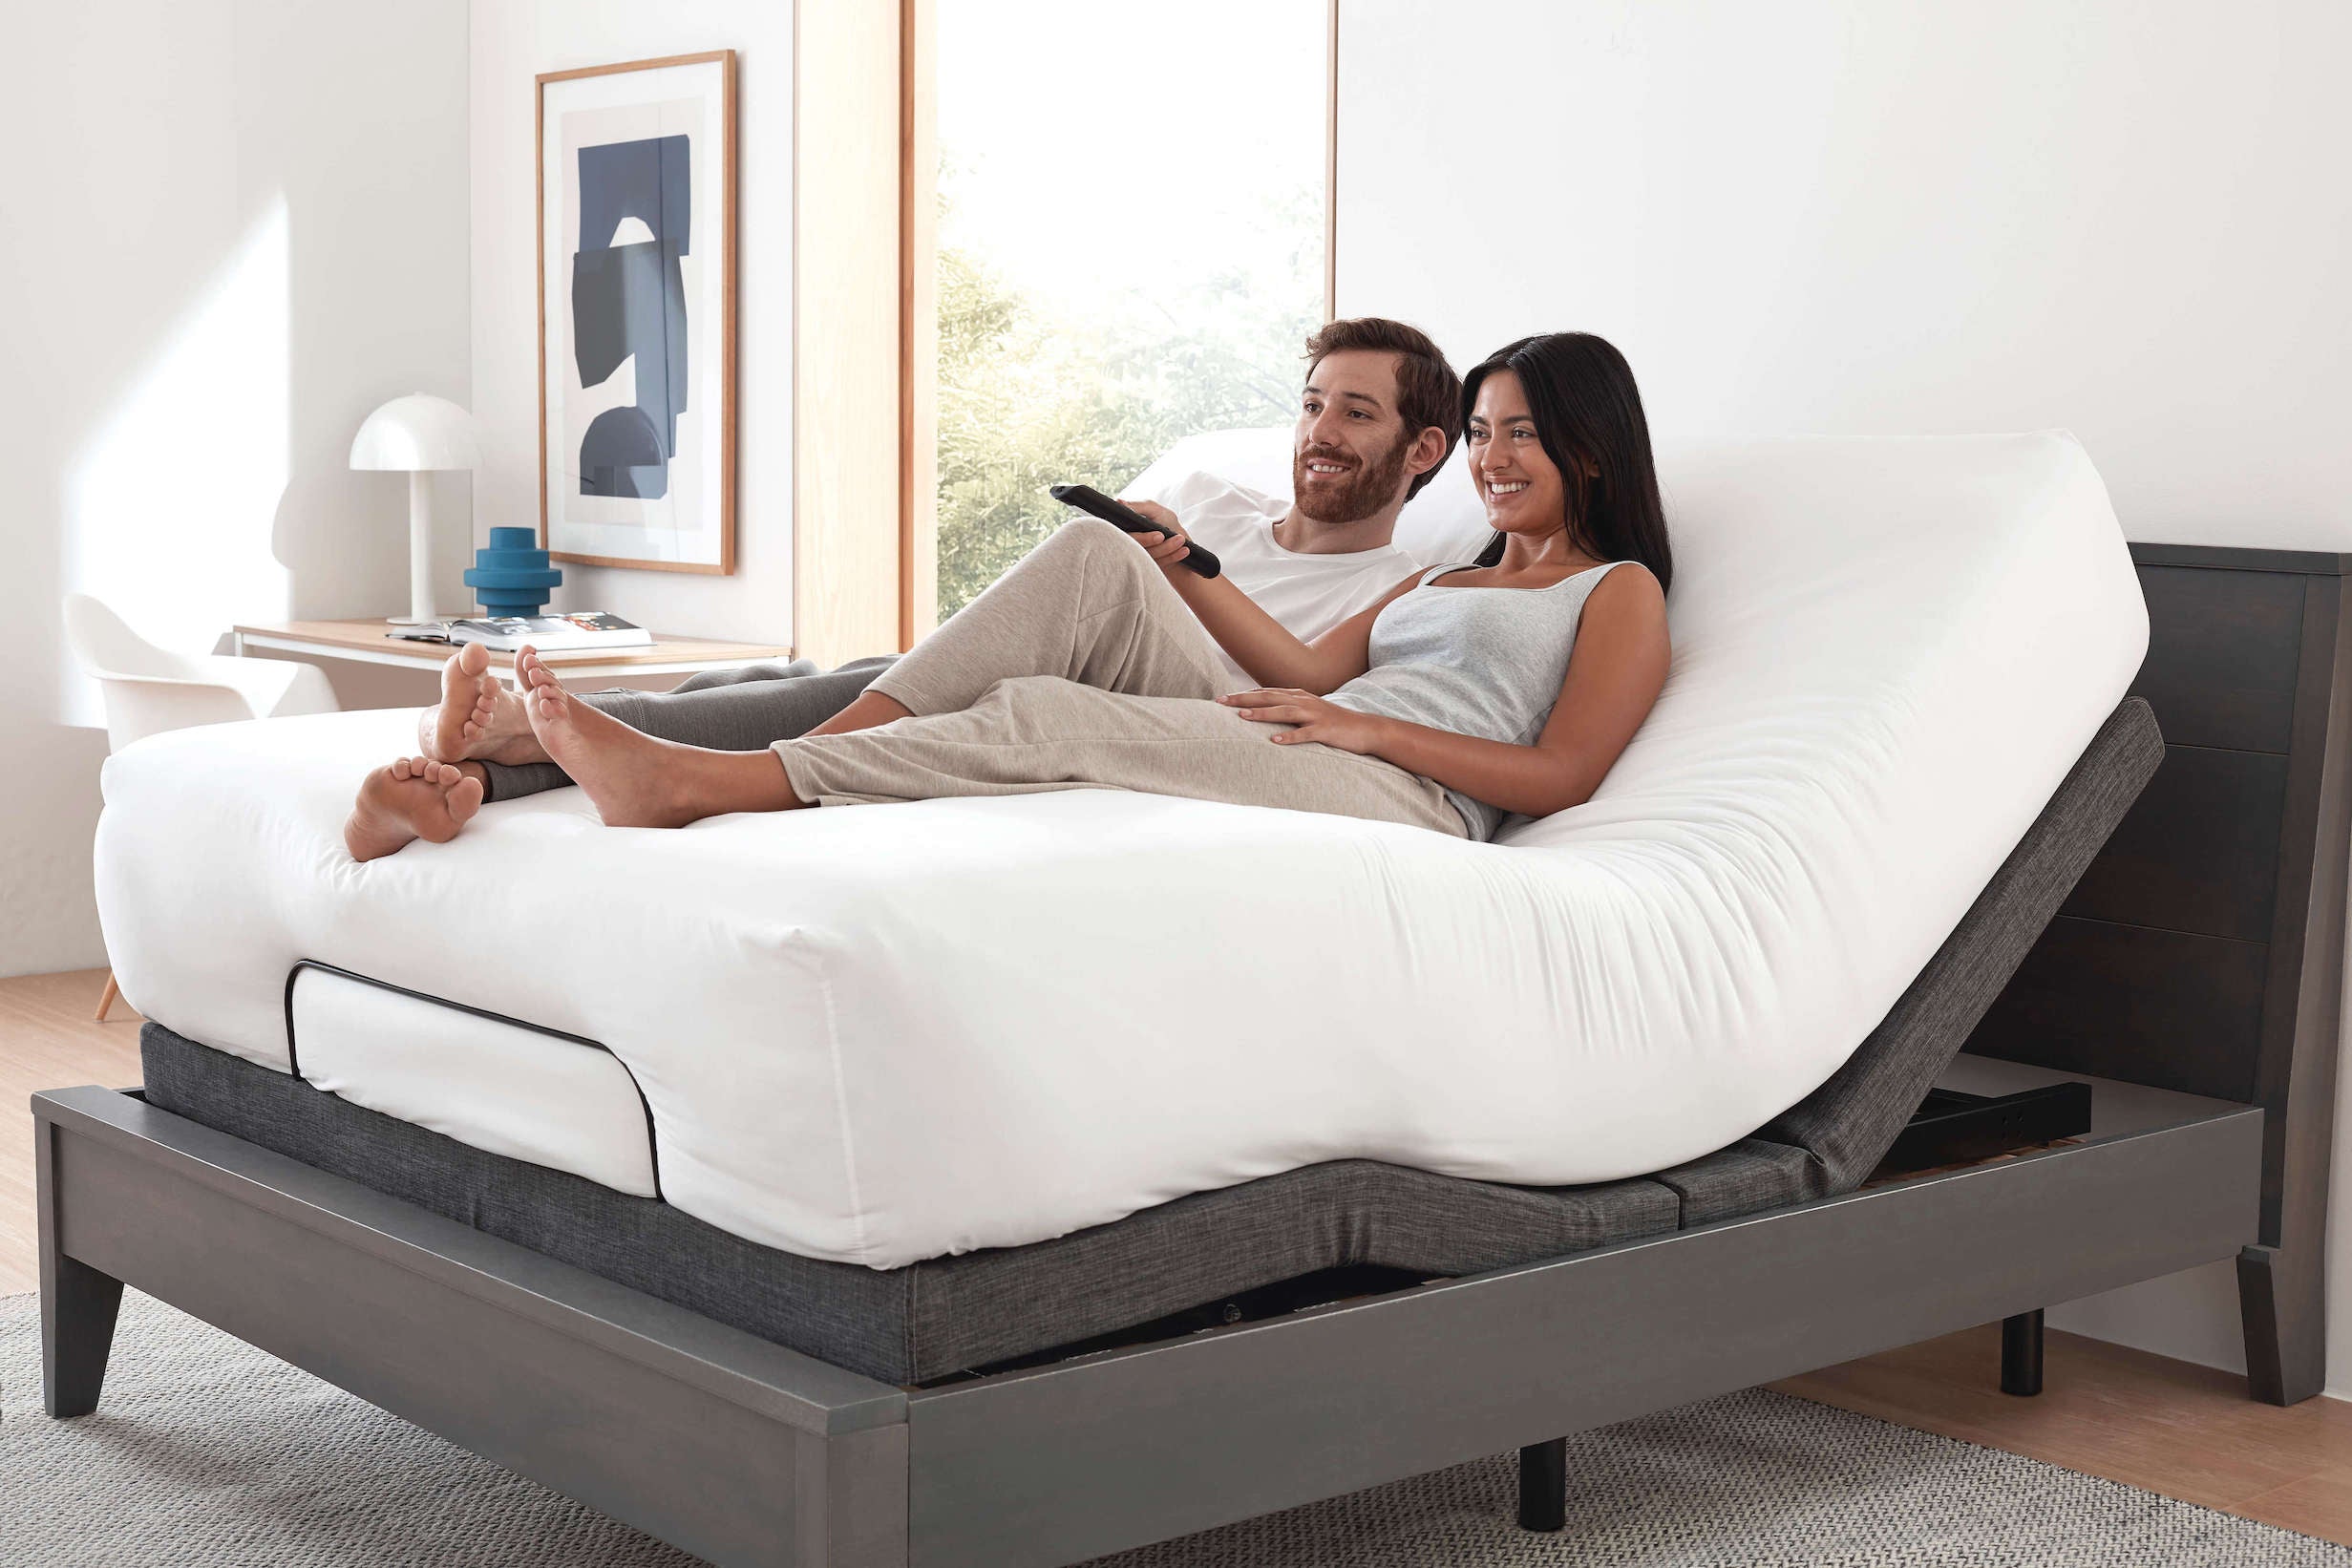 Adjustable Beds: Are They Worth It?